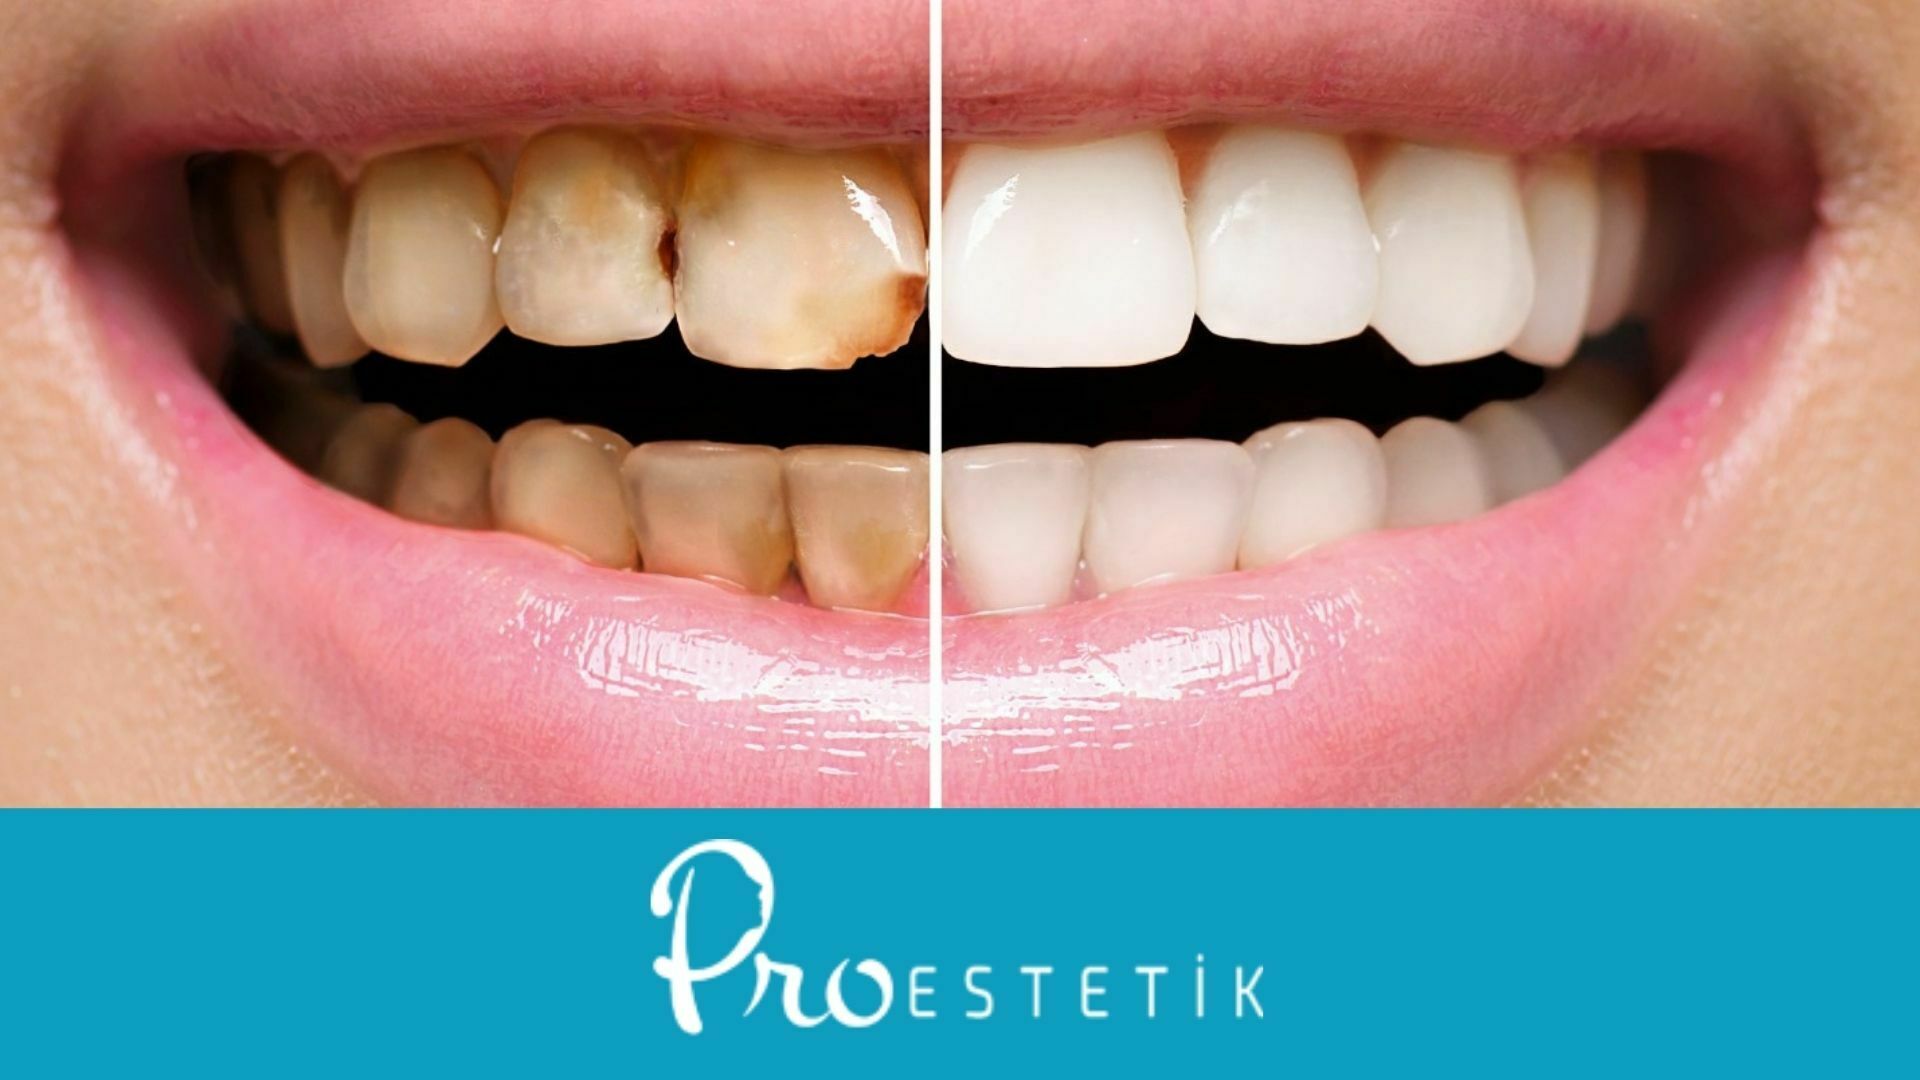 What Is Restorative Dentistry? Procedures & Treatments